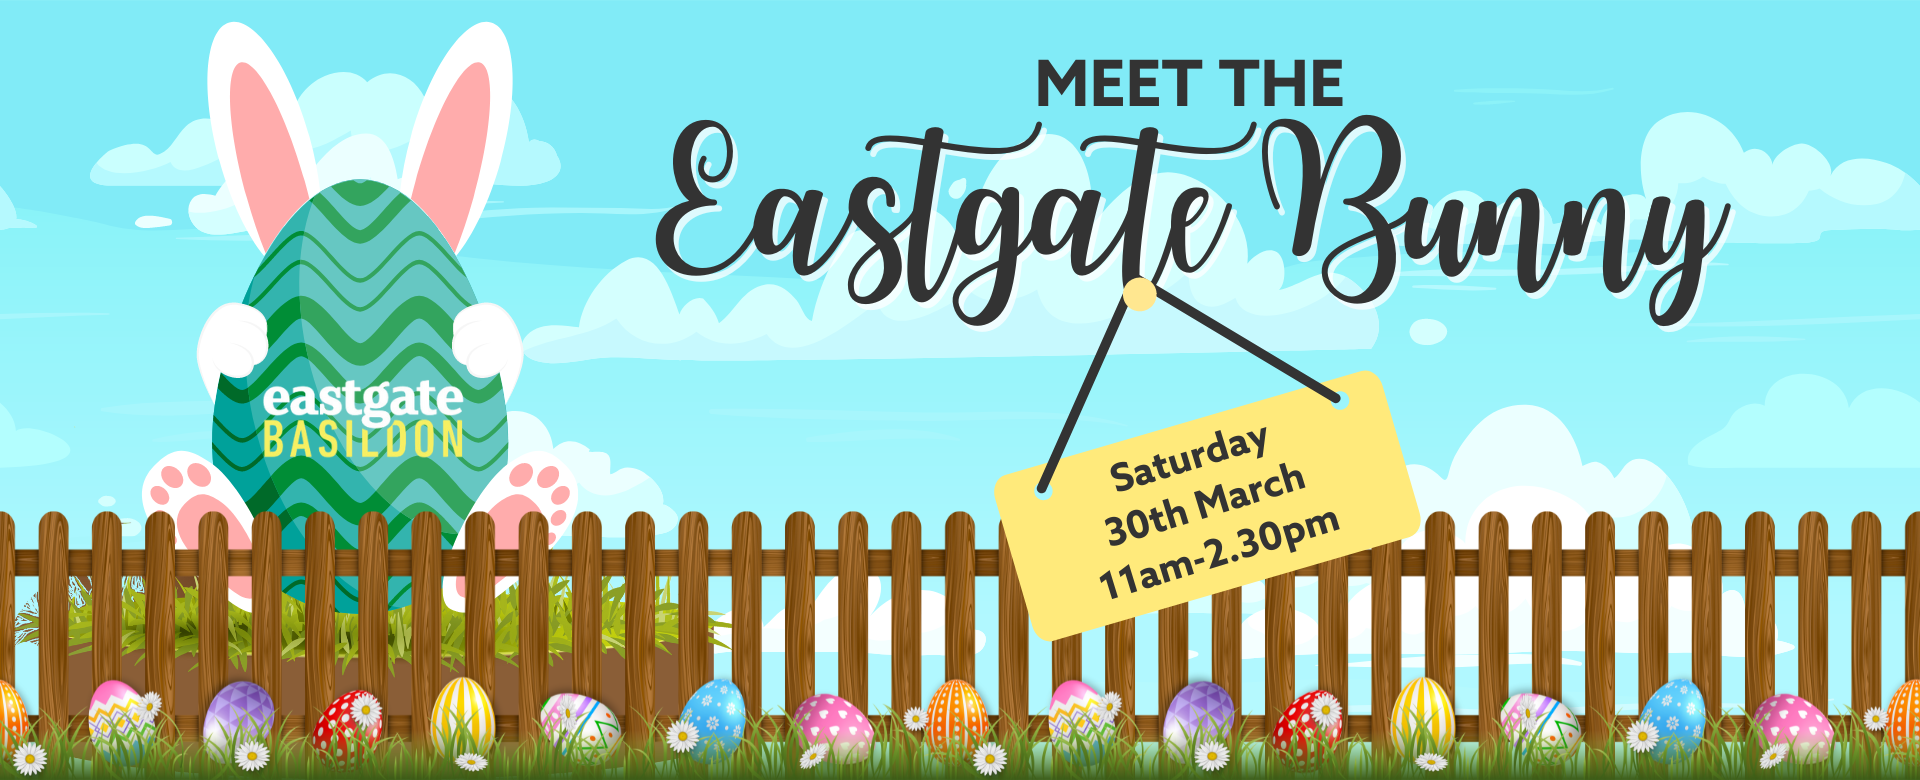 MEET THE EASTGATE BUNNY!